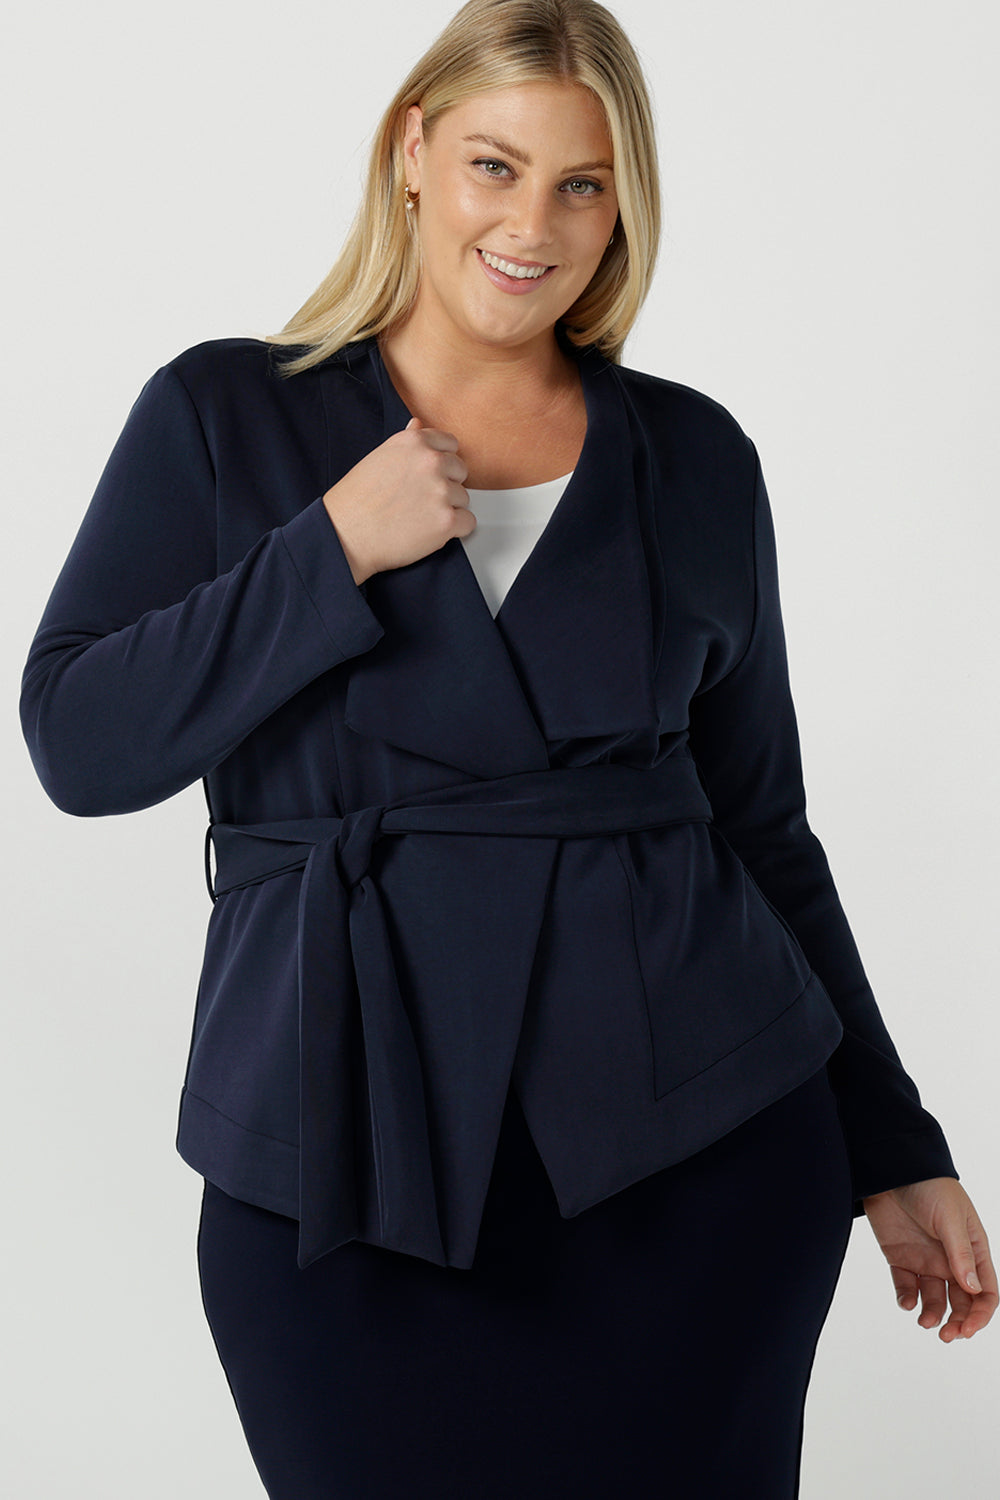 A size 18 woman wears the Lyndon Jacket in Bluestone. A wrap style jacket with waist belt and collared neckline. Made in soft luxurios modal. Rug up on the way to the office or weekend winter get away. Made in Australia for women size 8 -24. 